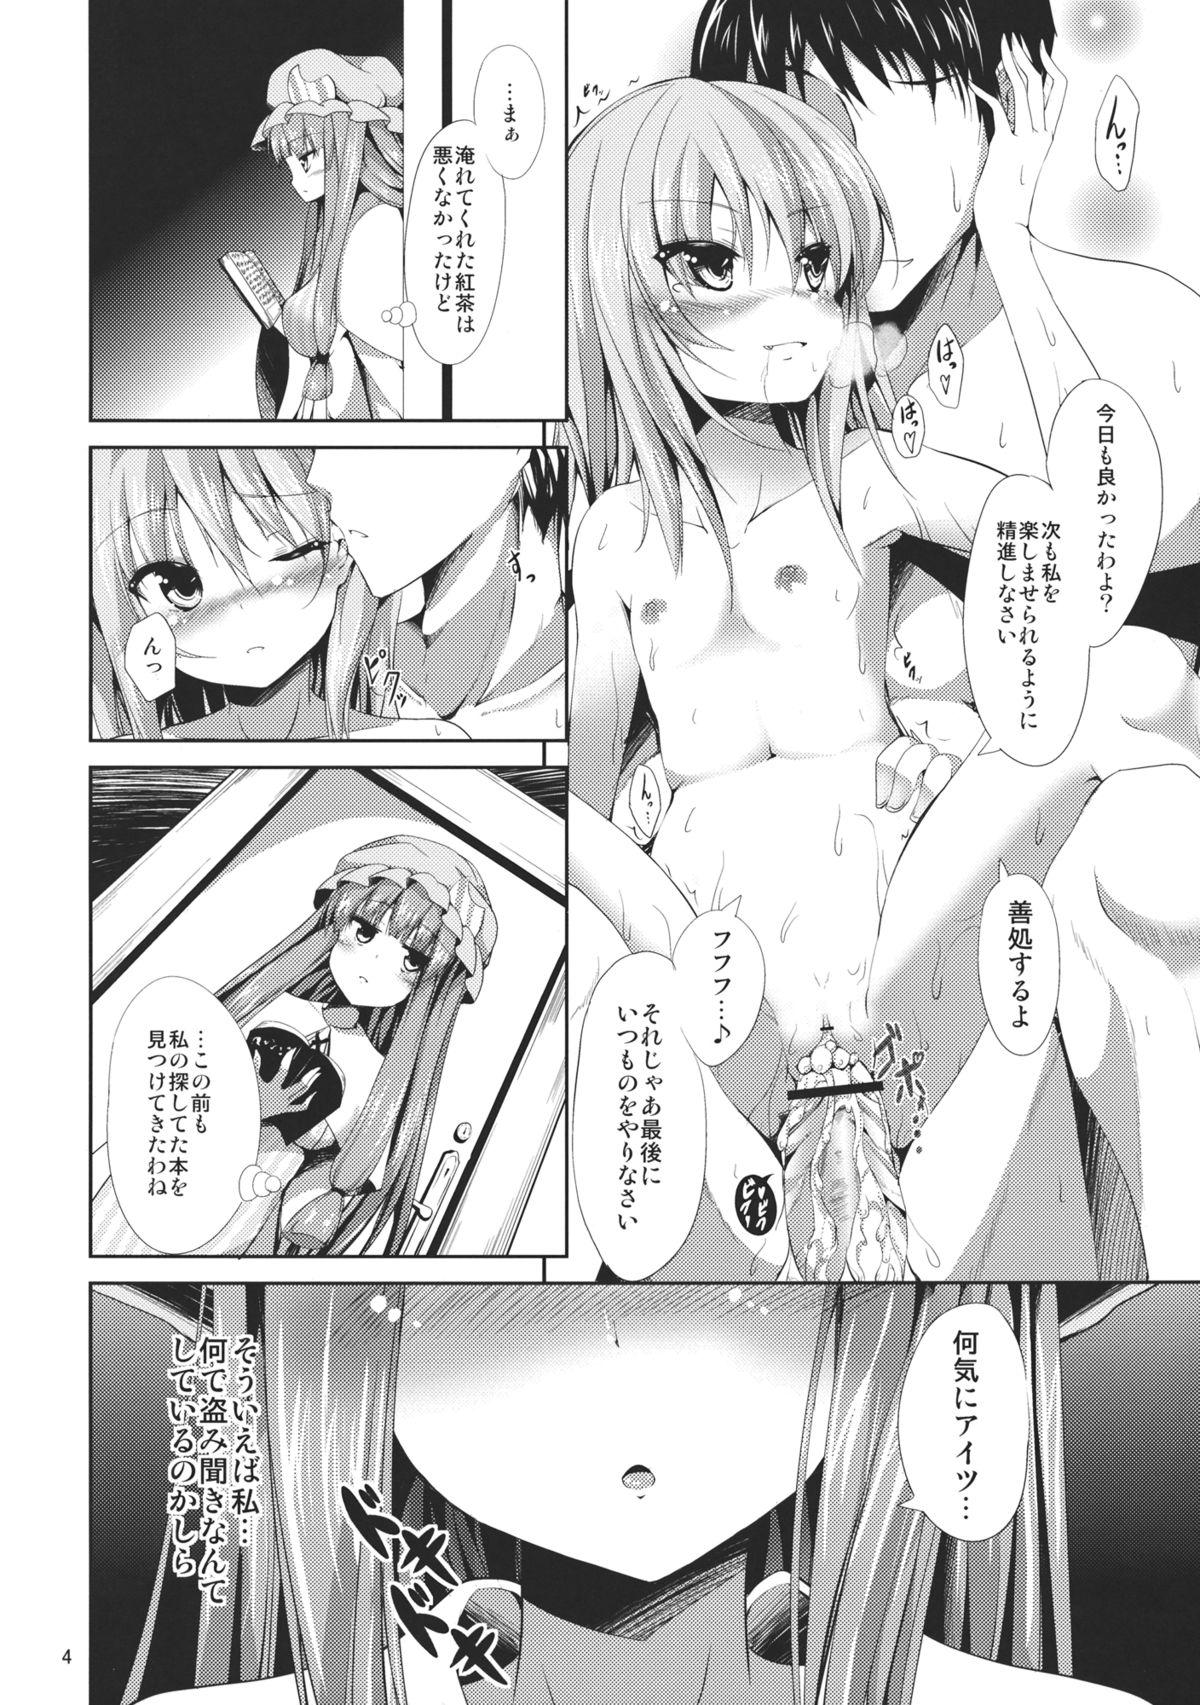 Ass Licking Sweet nothingS - Touhou project Naked Sluts - Page 4